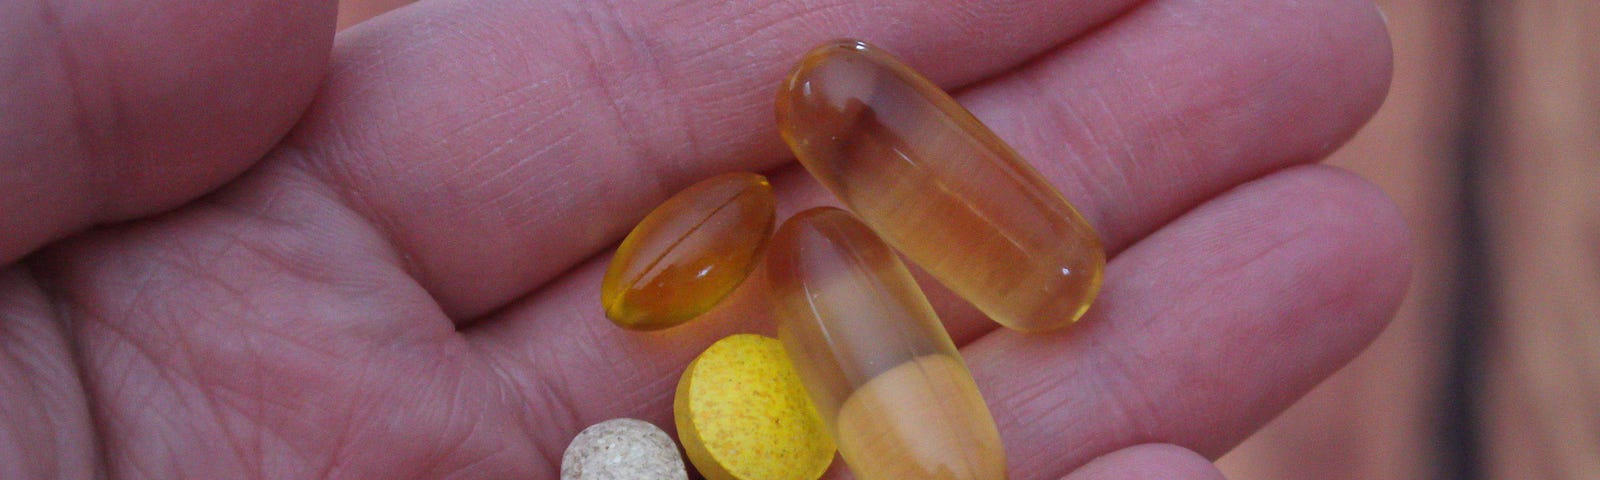 A hand holding assorted vitamin pills.